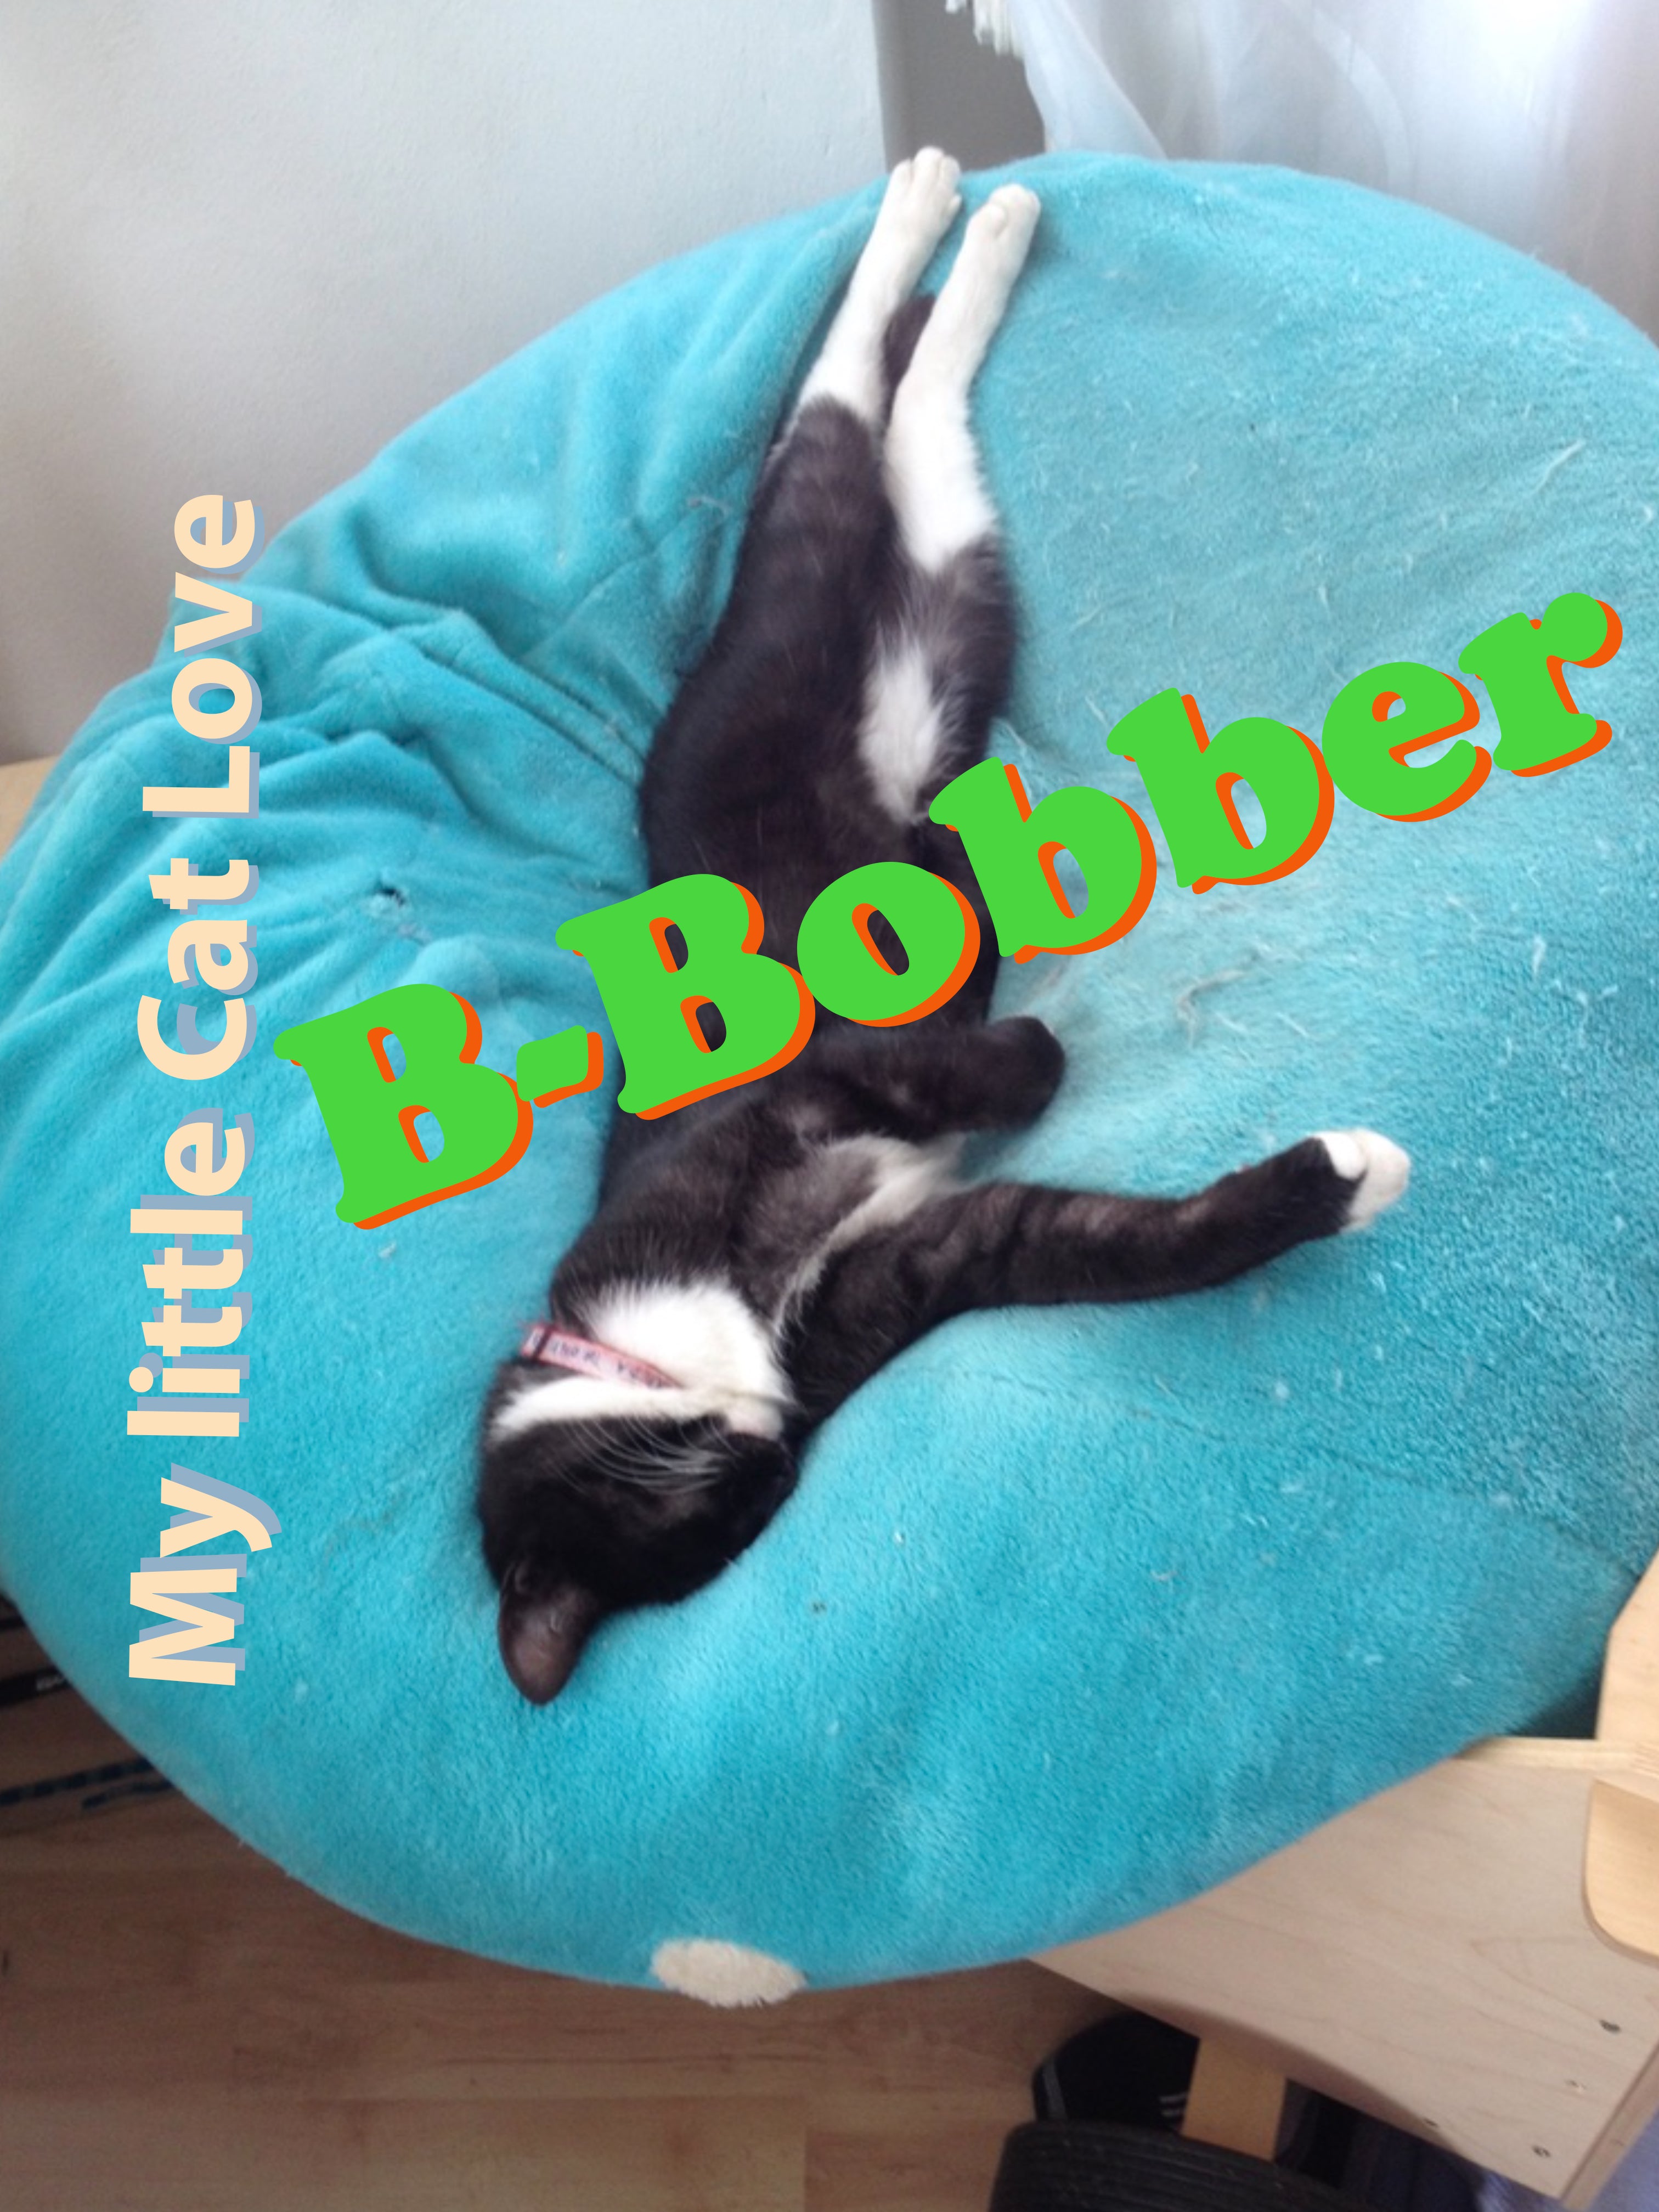 new crew new luck now with:B-Bobber and the song:"My little Cat Love"as a 32 bit 48 kHz loosless wav file